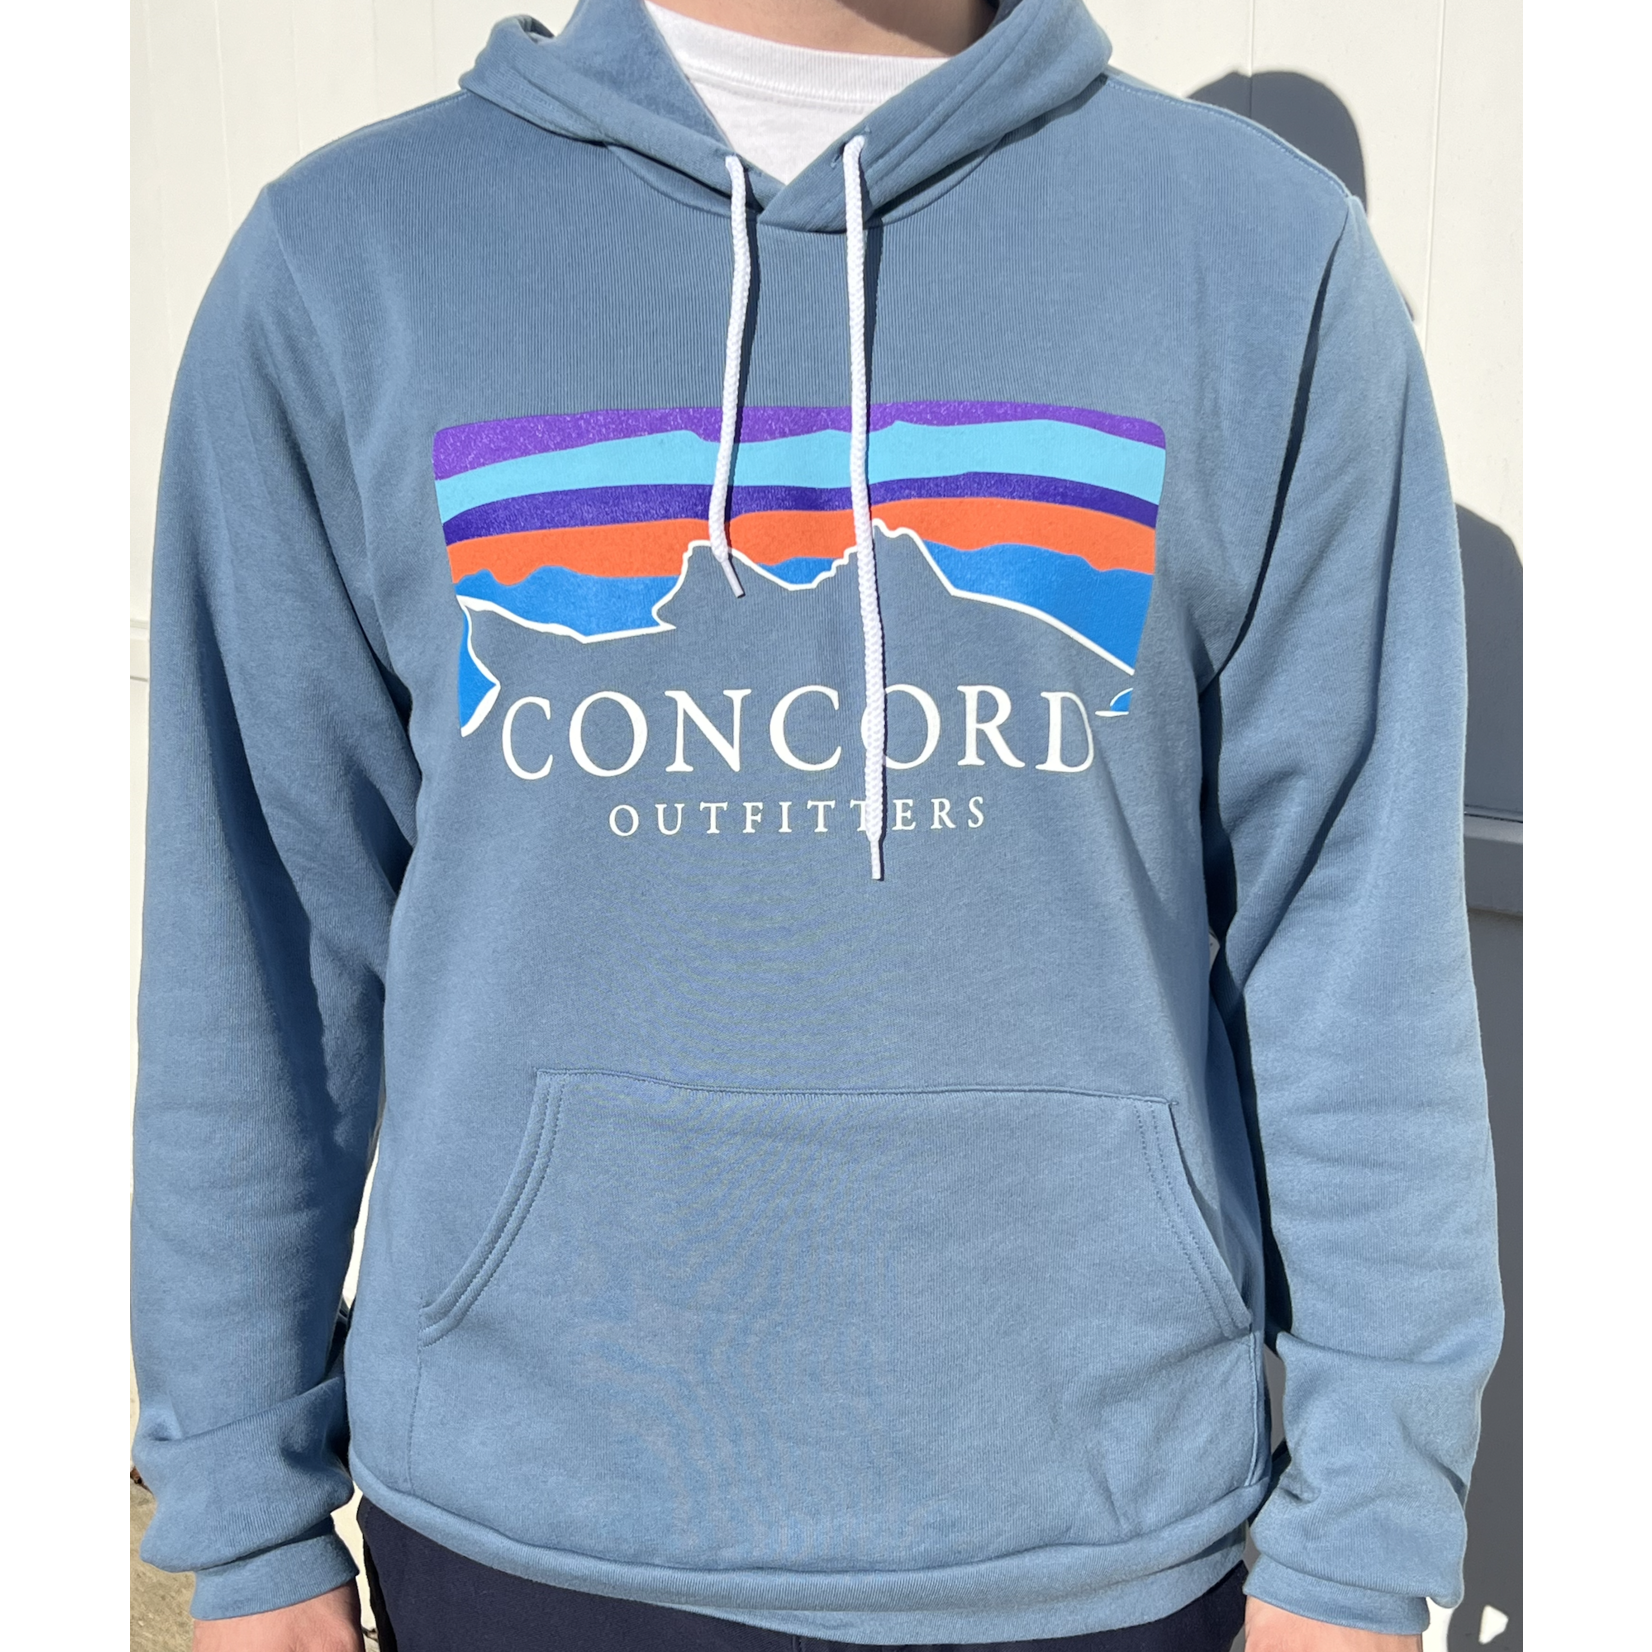 Concord Outfitters NEW Concord Outfitters Striper Hoody